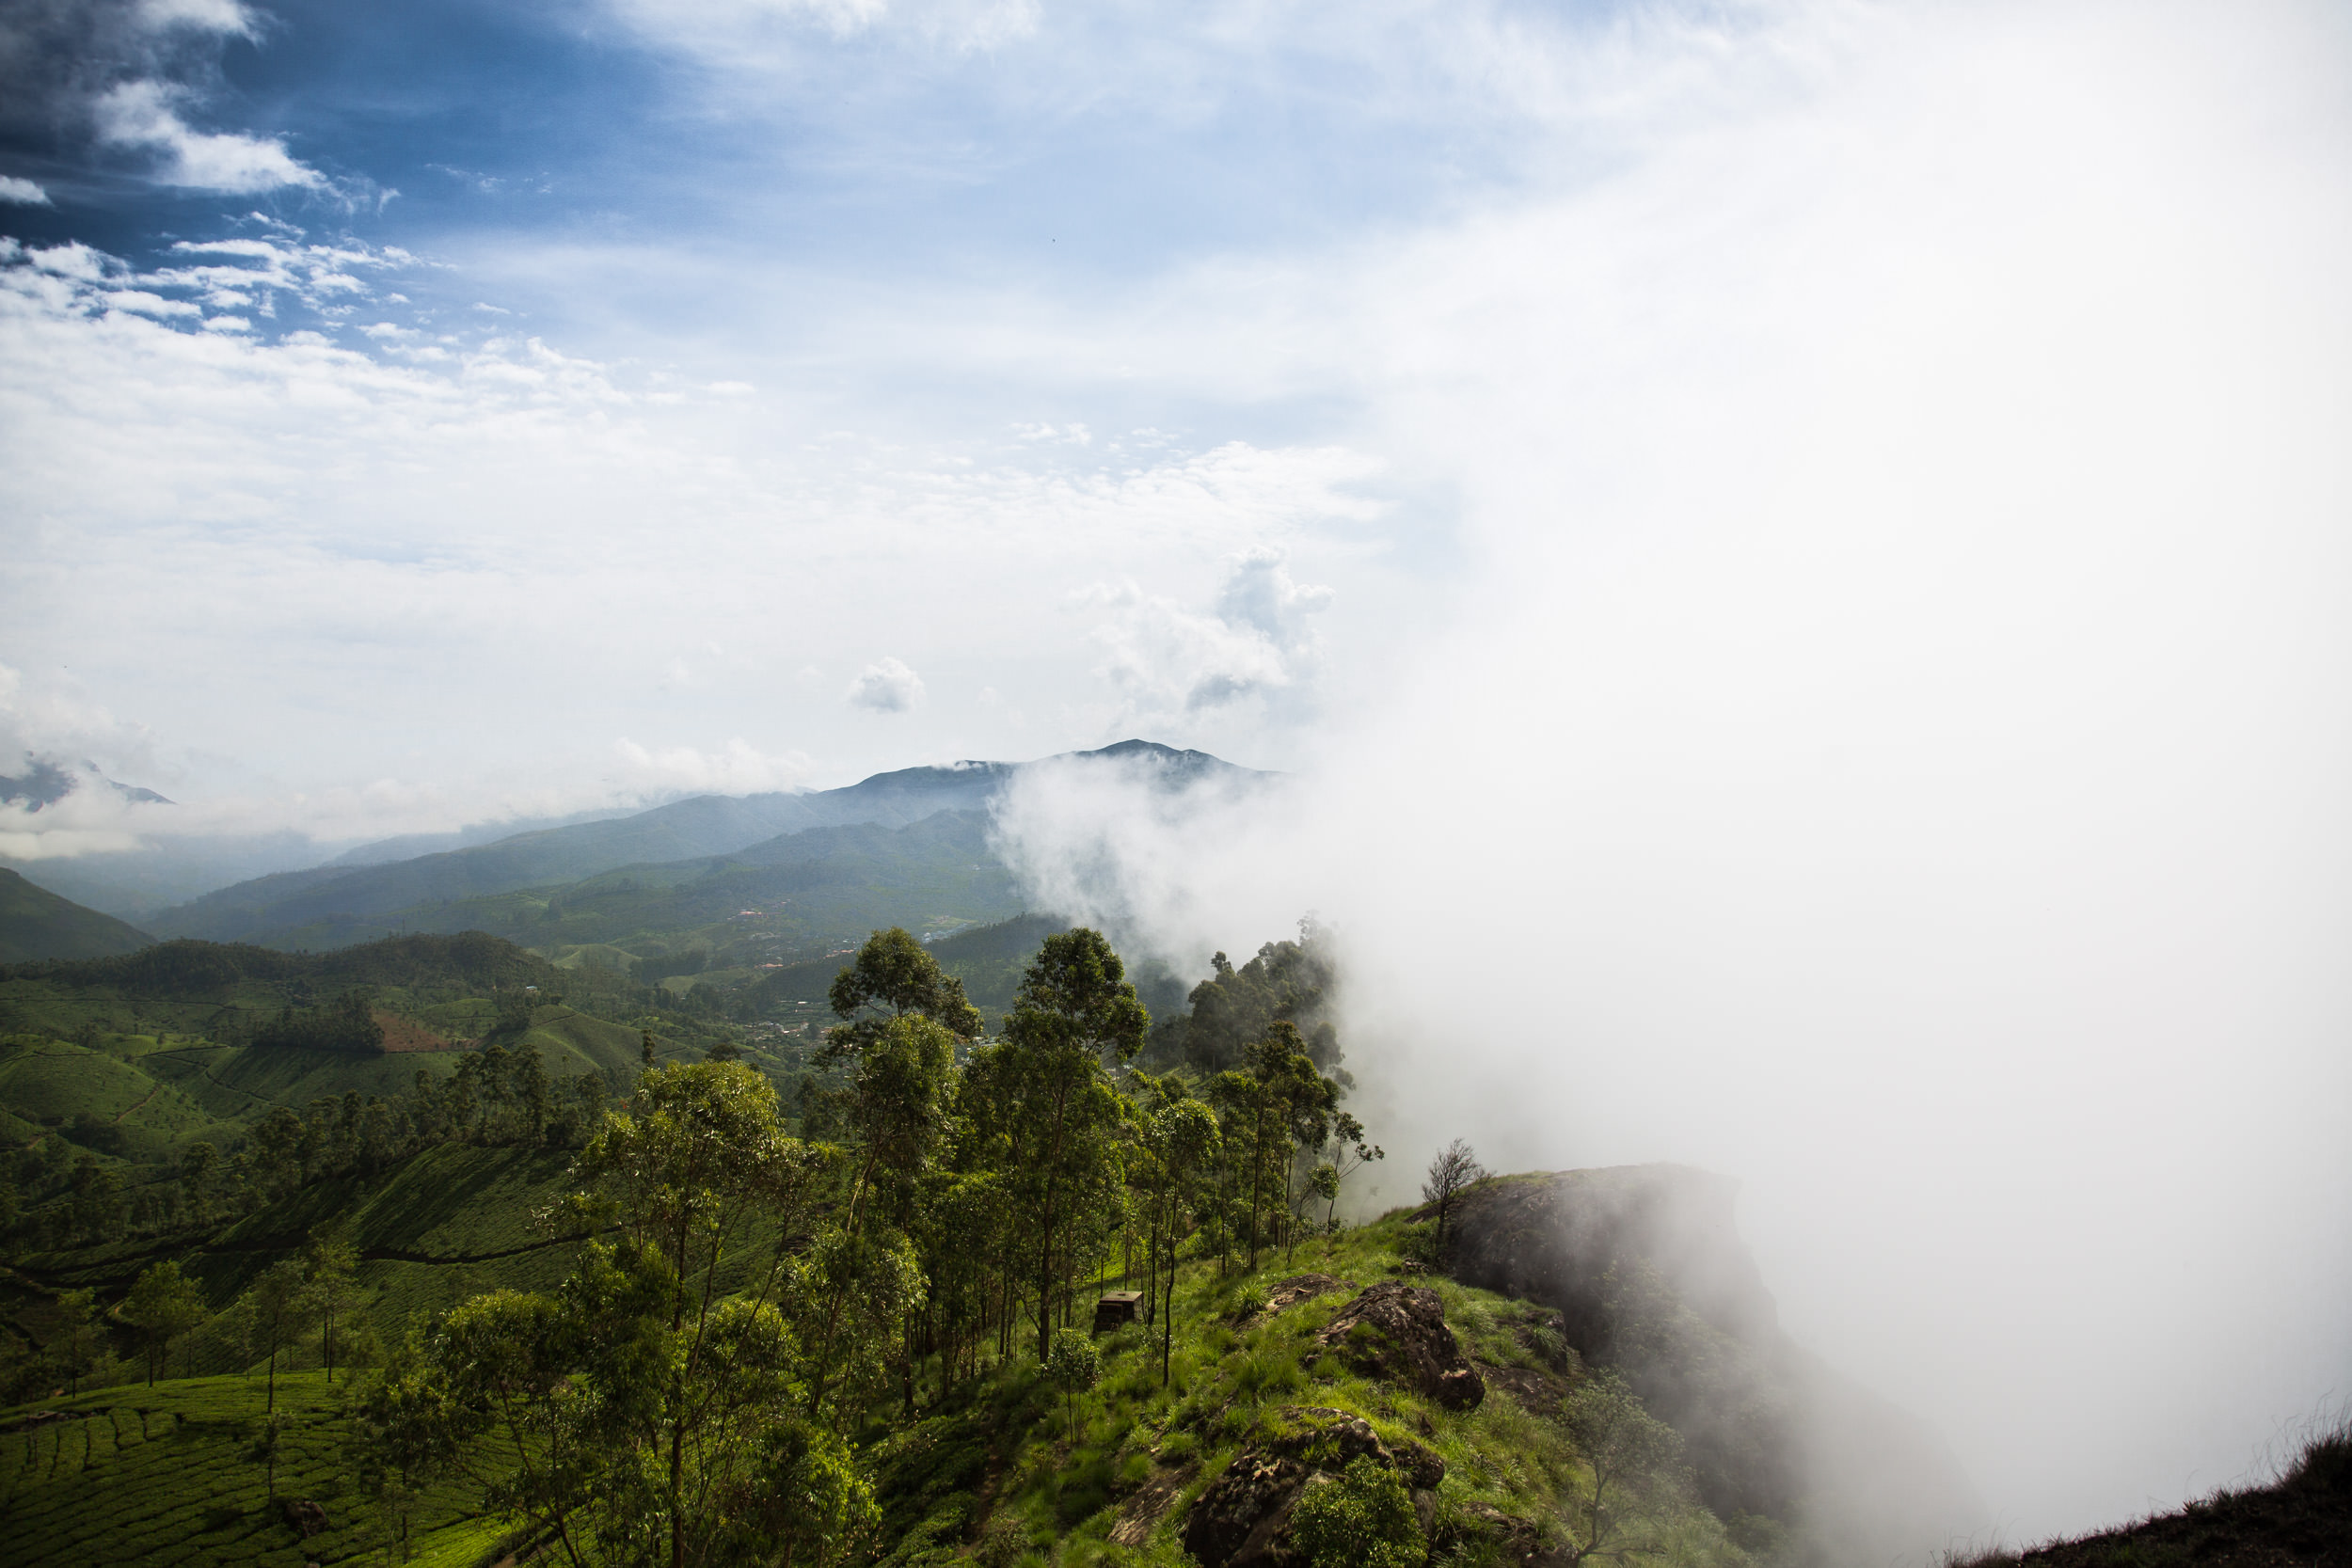  The climate is perfect for tea, and it mkaes for an amazing experience as the clouds roll in over the peaks and decend down into the plantations bellow. 